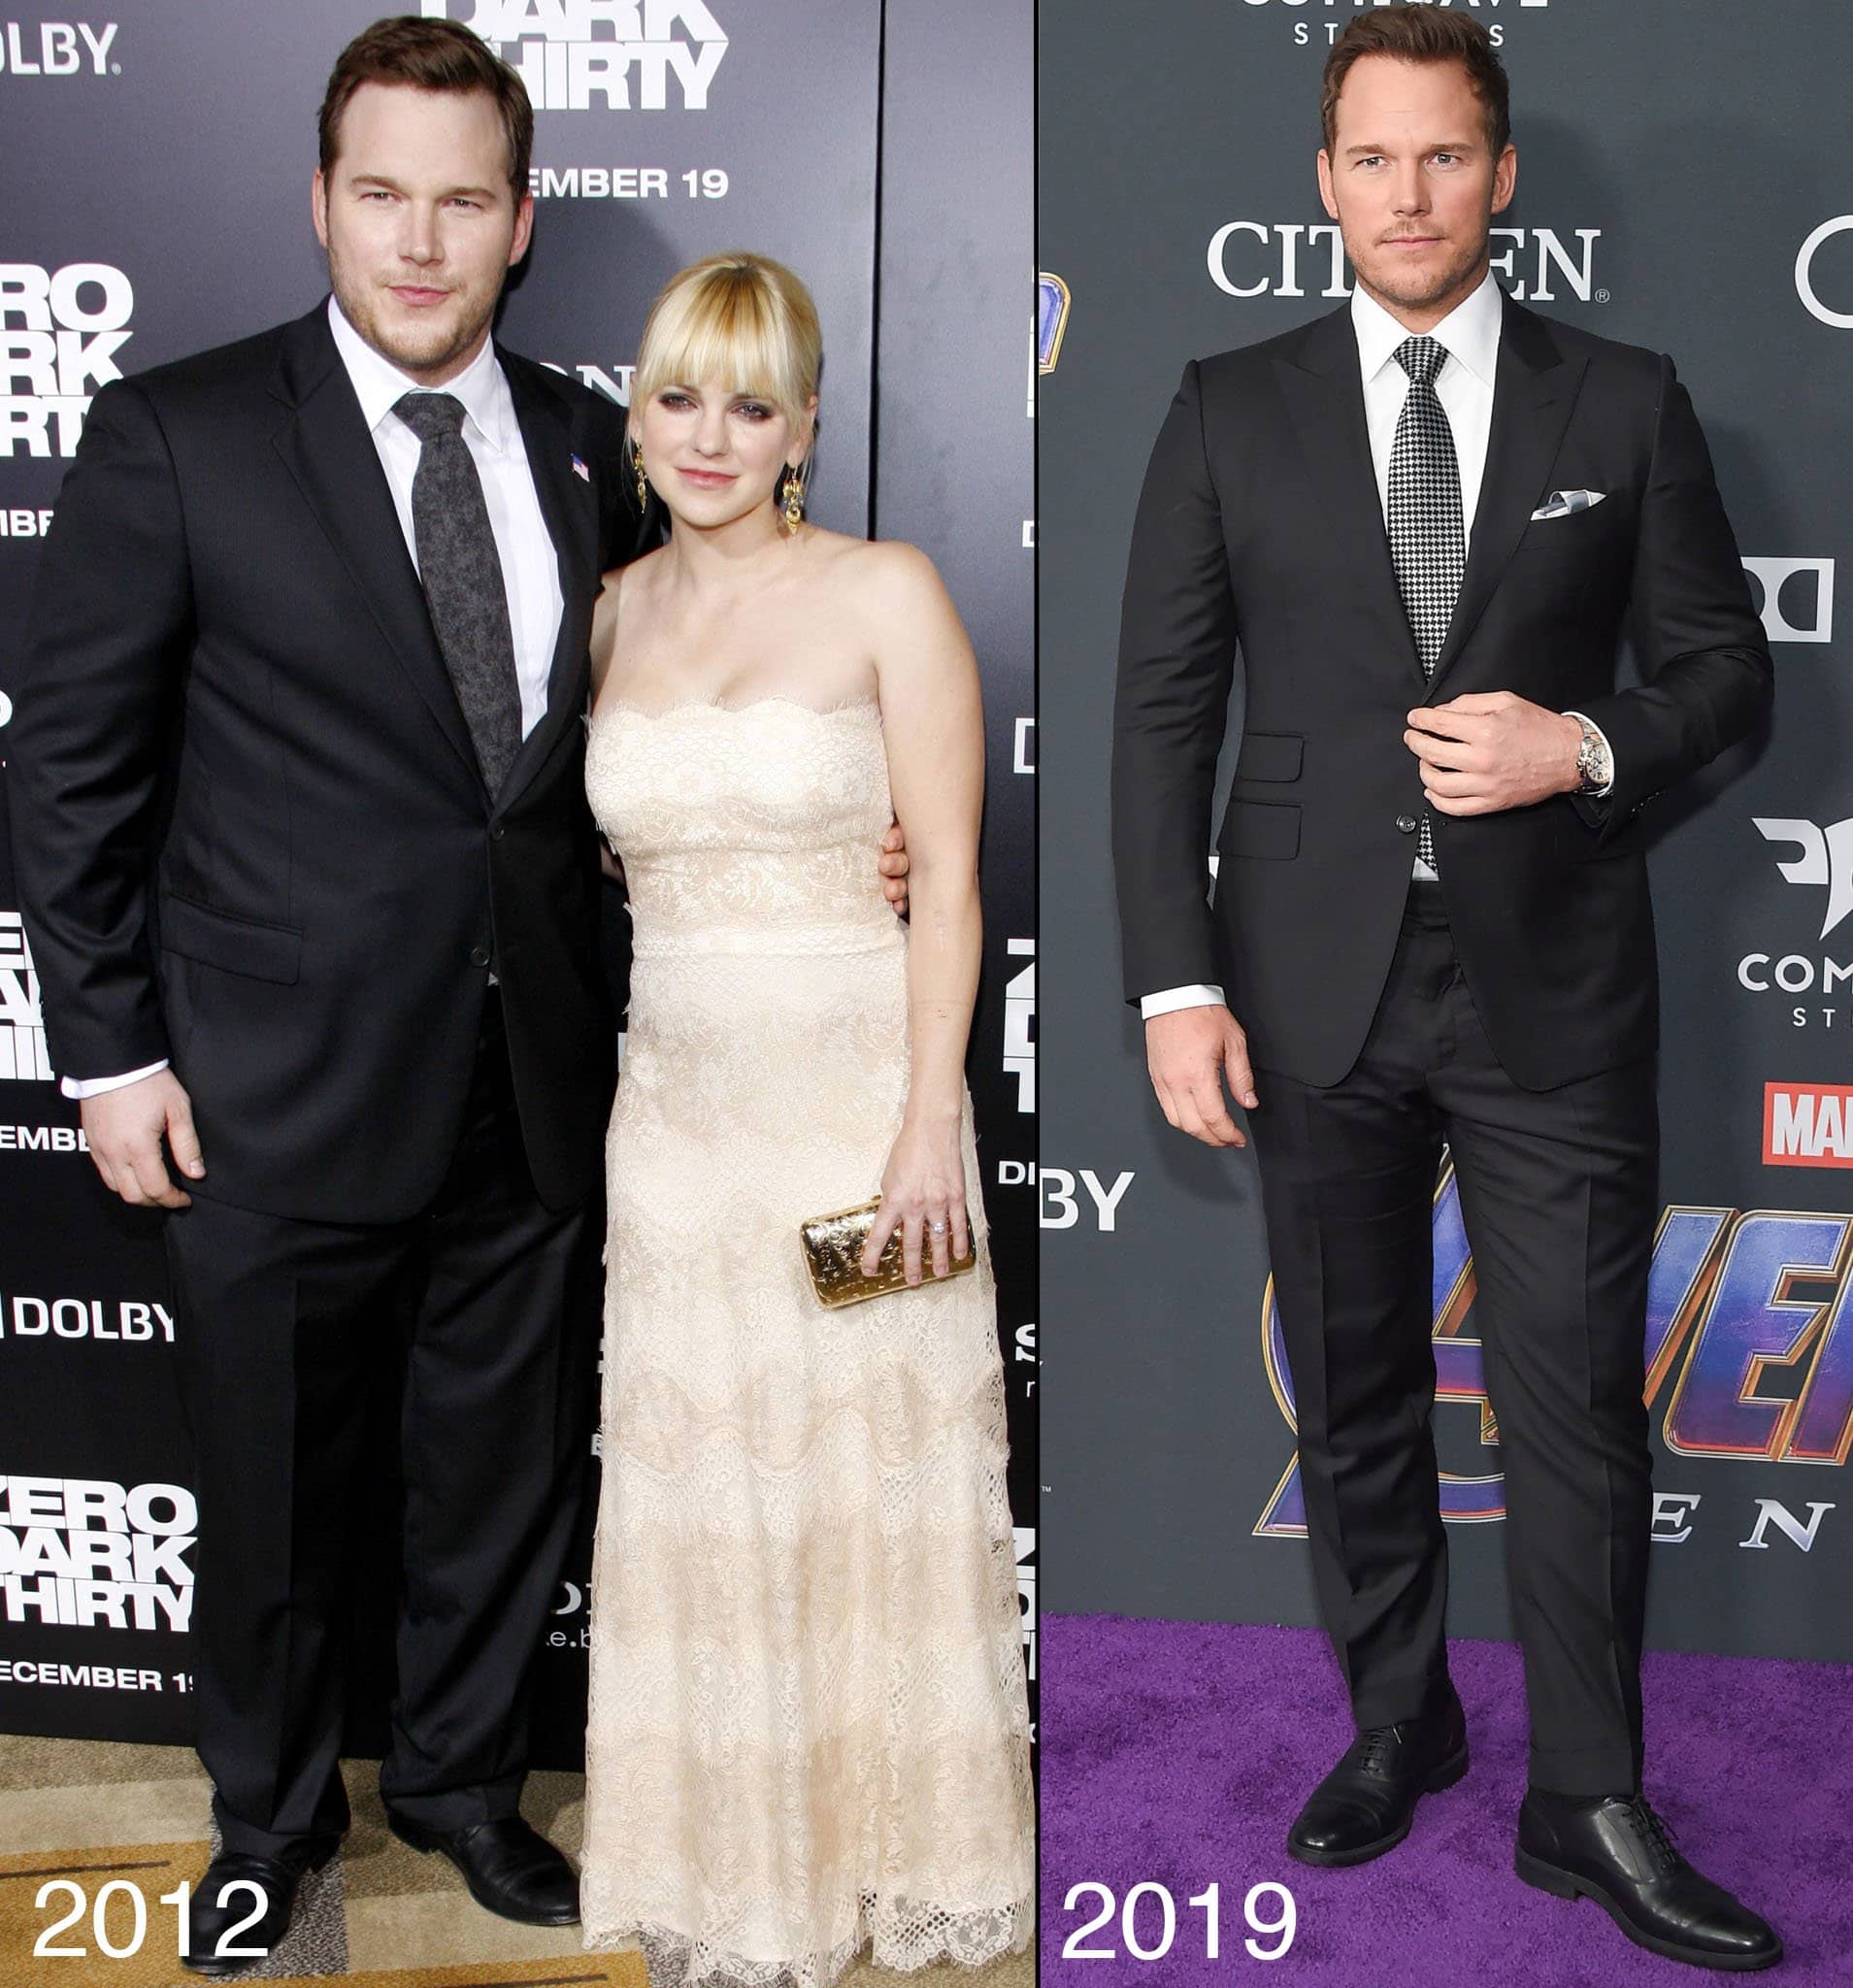 Chris Pratt lost 60 pounds in six months when he was hired to be the main character for Guardians of the Galaxy in 2015